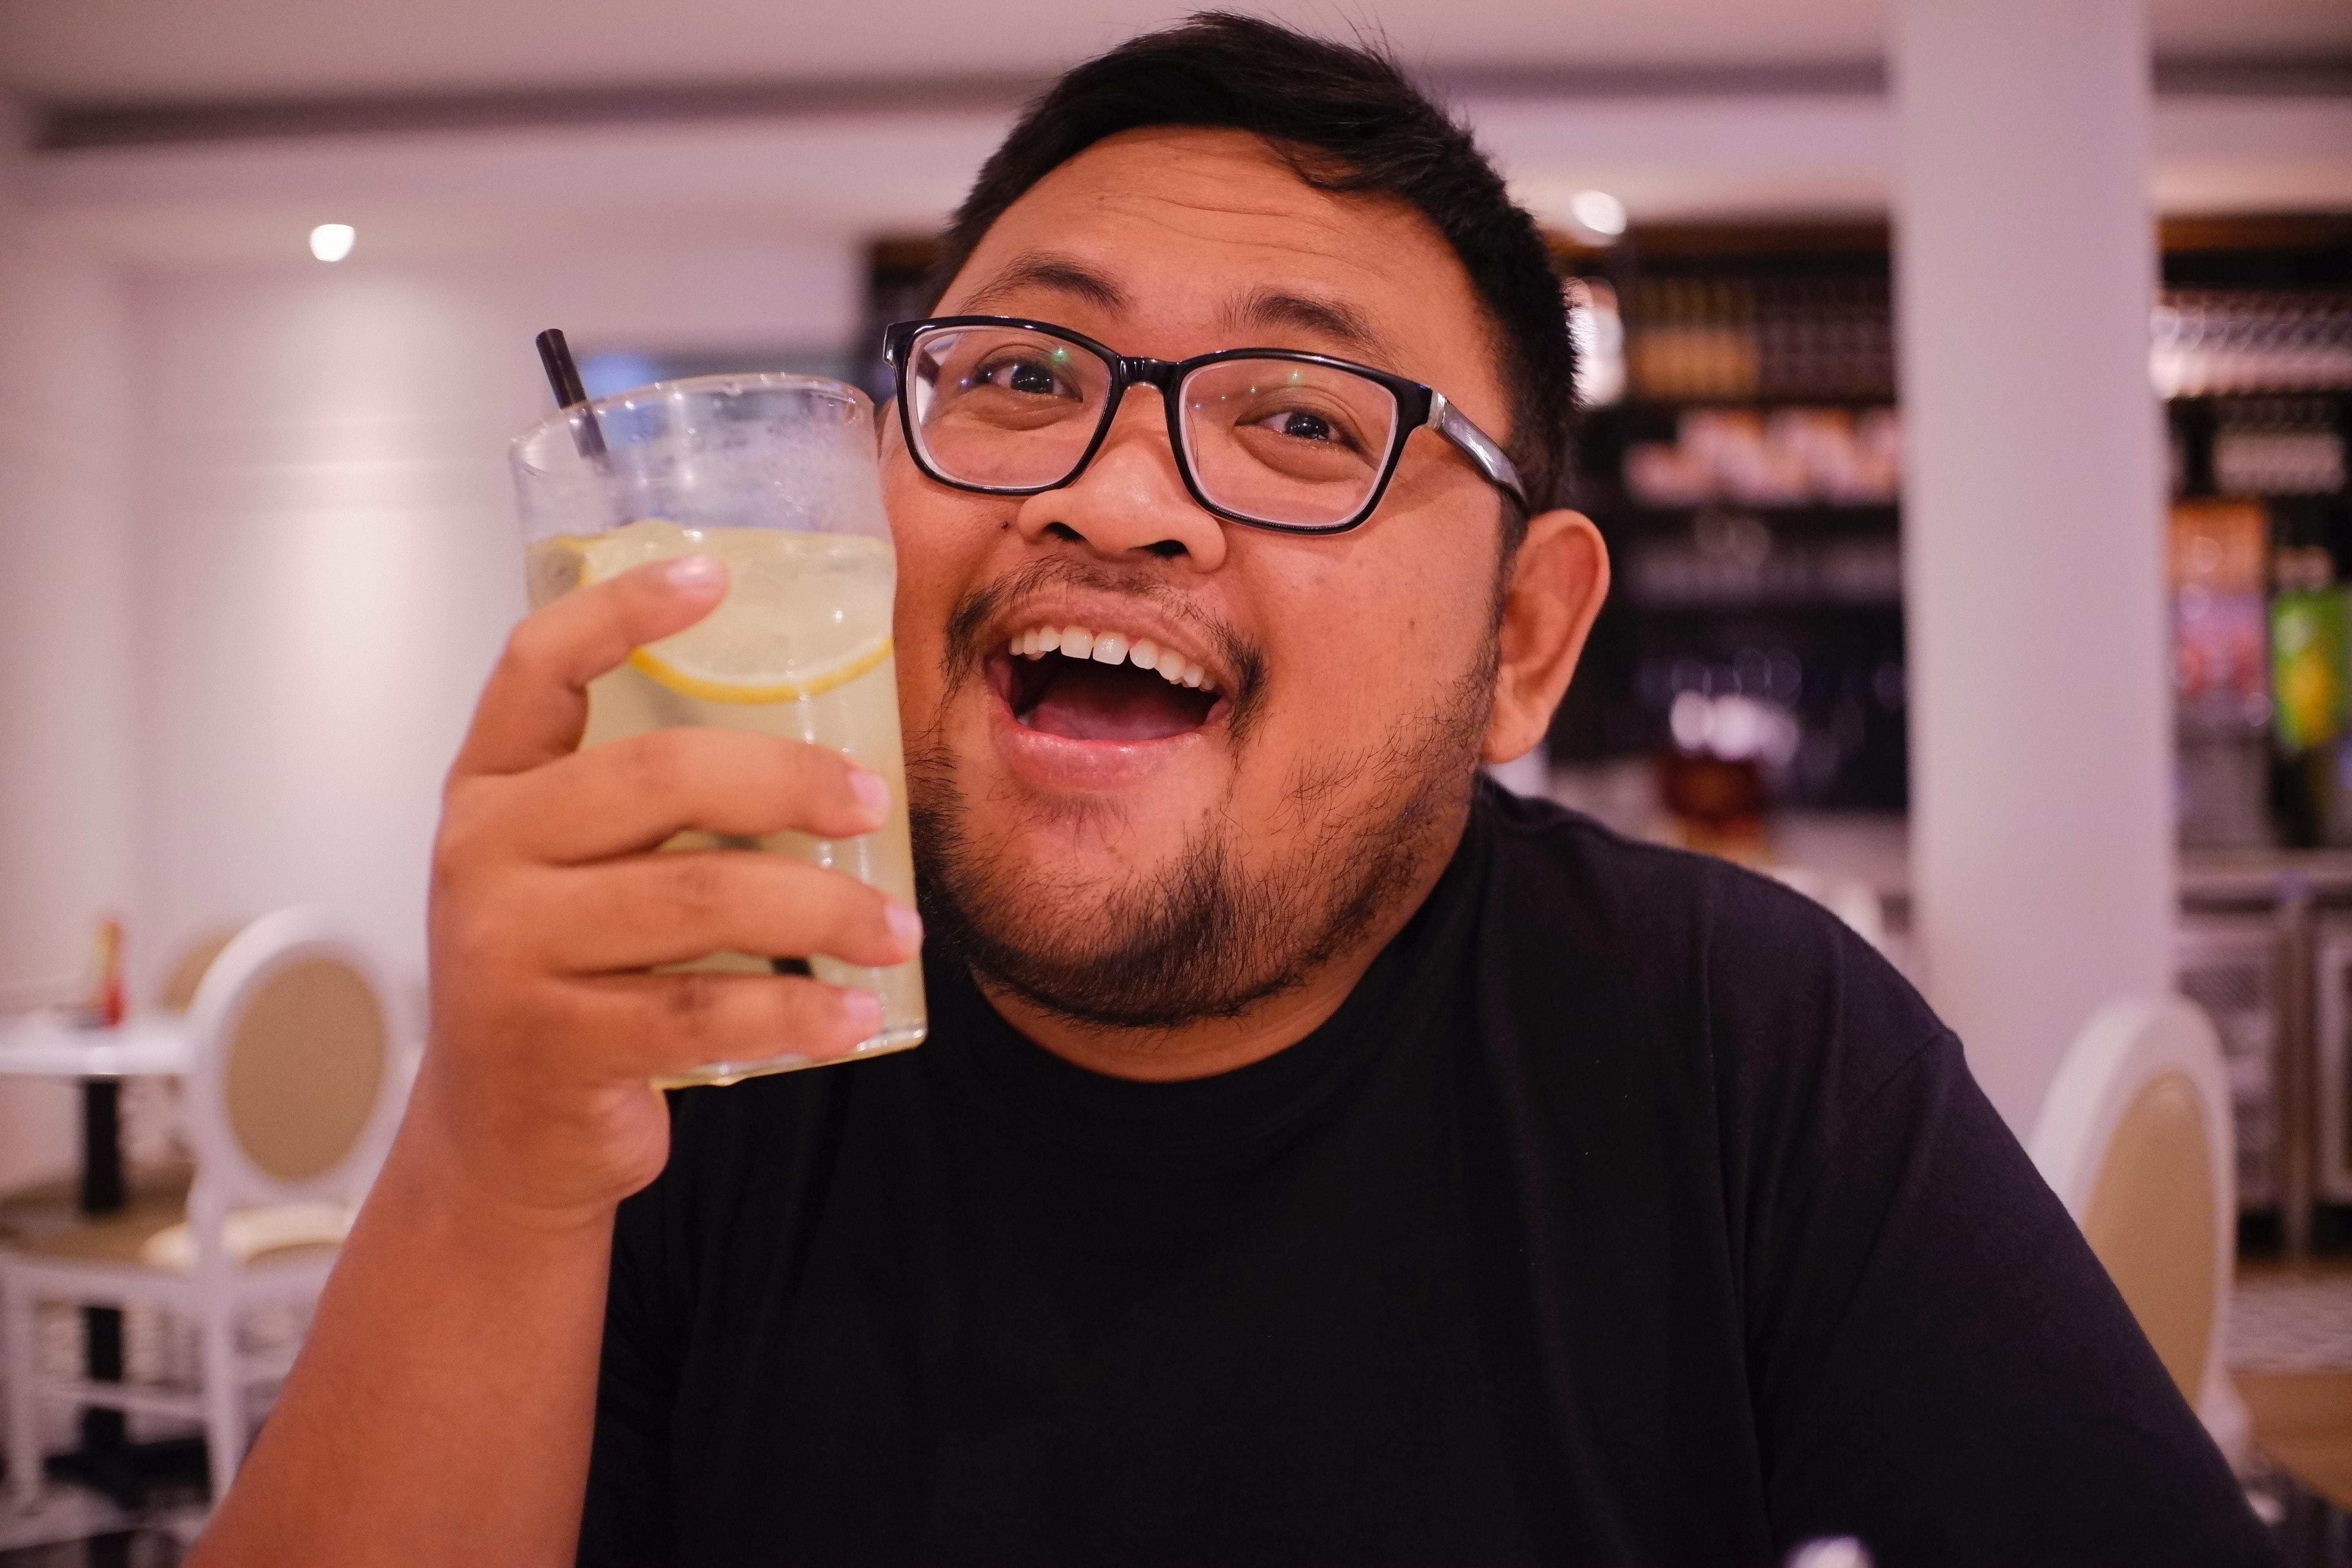 Smiling man holding a drink